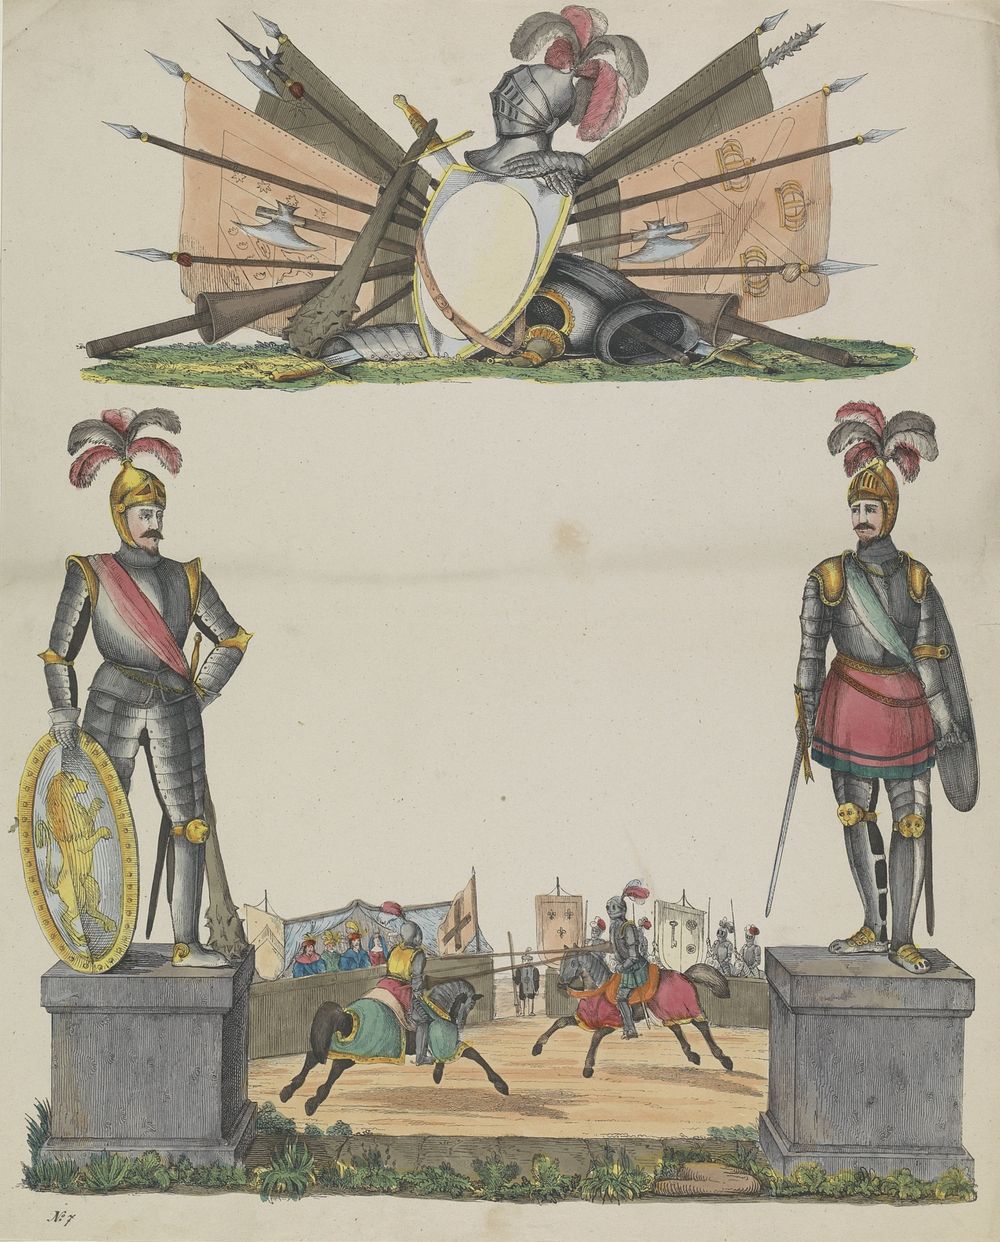 Wensbrief met riddertoernooi (c. 1780 - c. 1899) by anonymous and anonymous